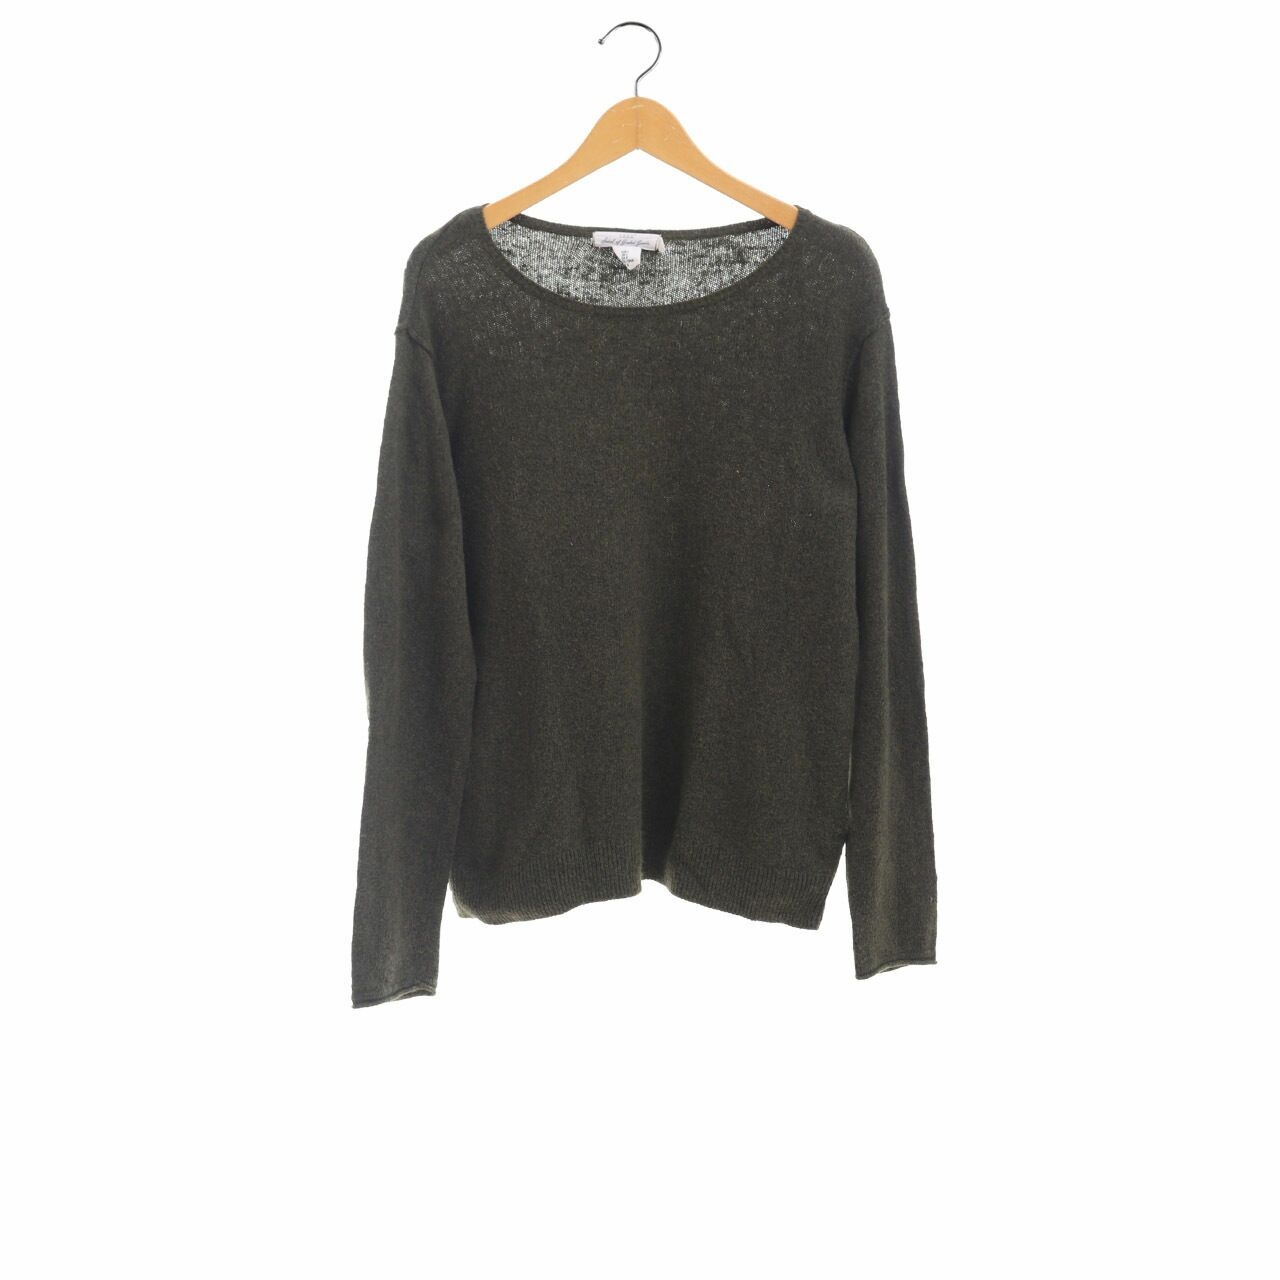 H&M Olive Knit Sweater